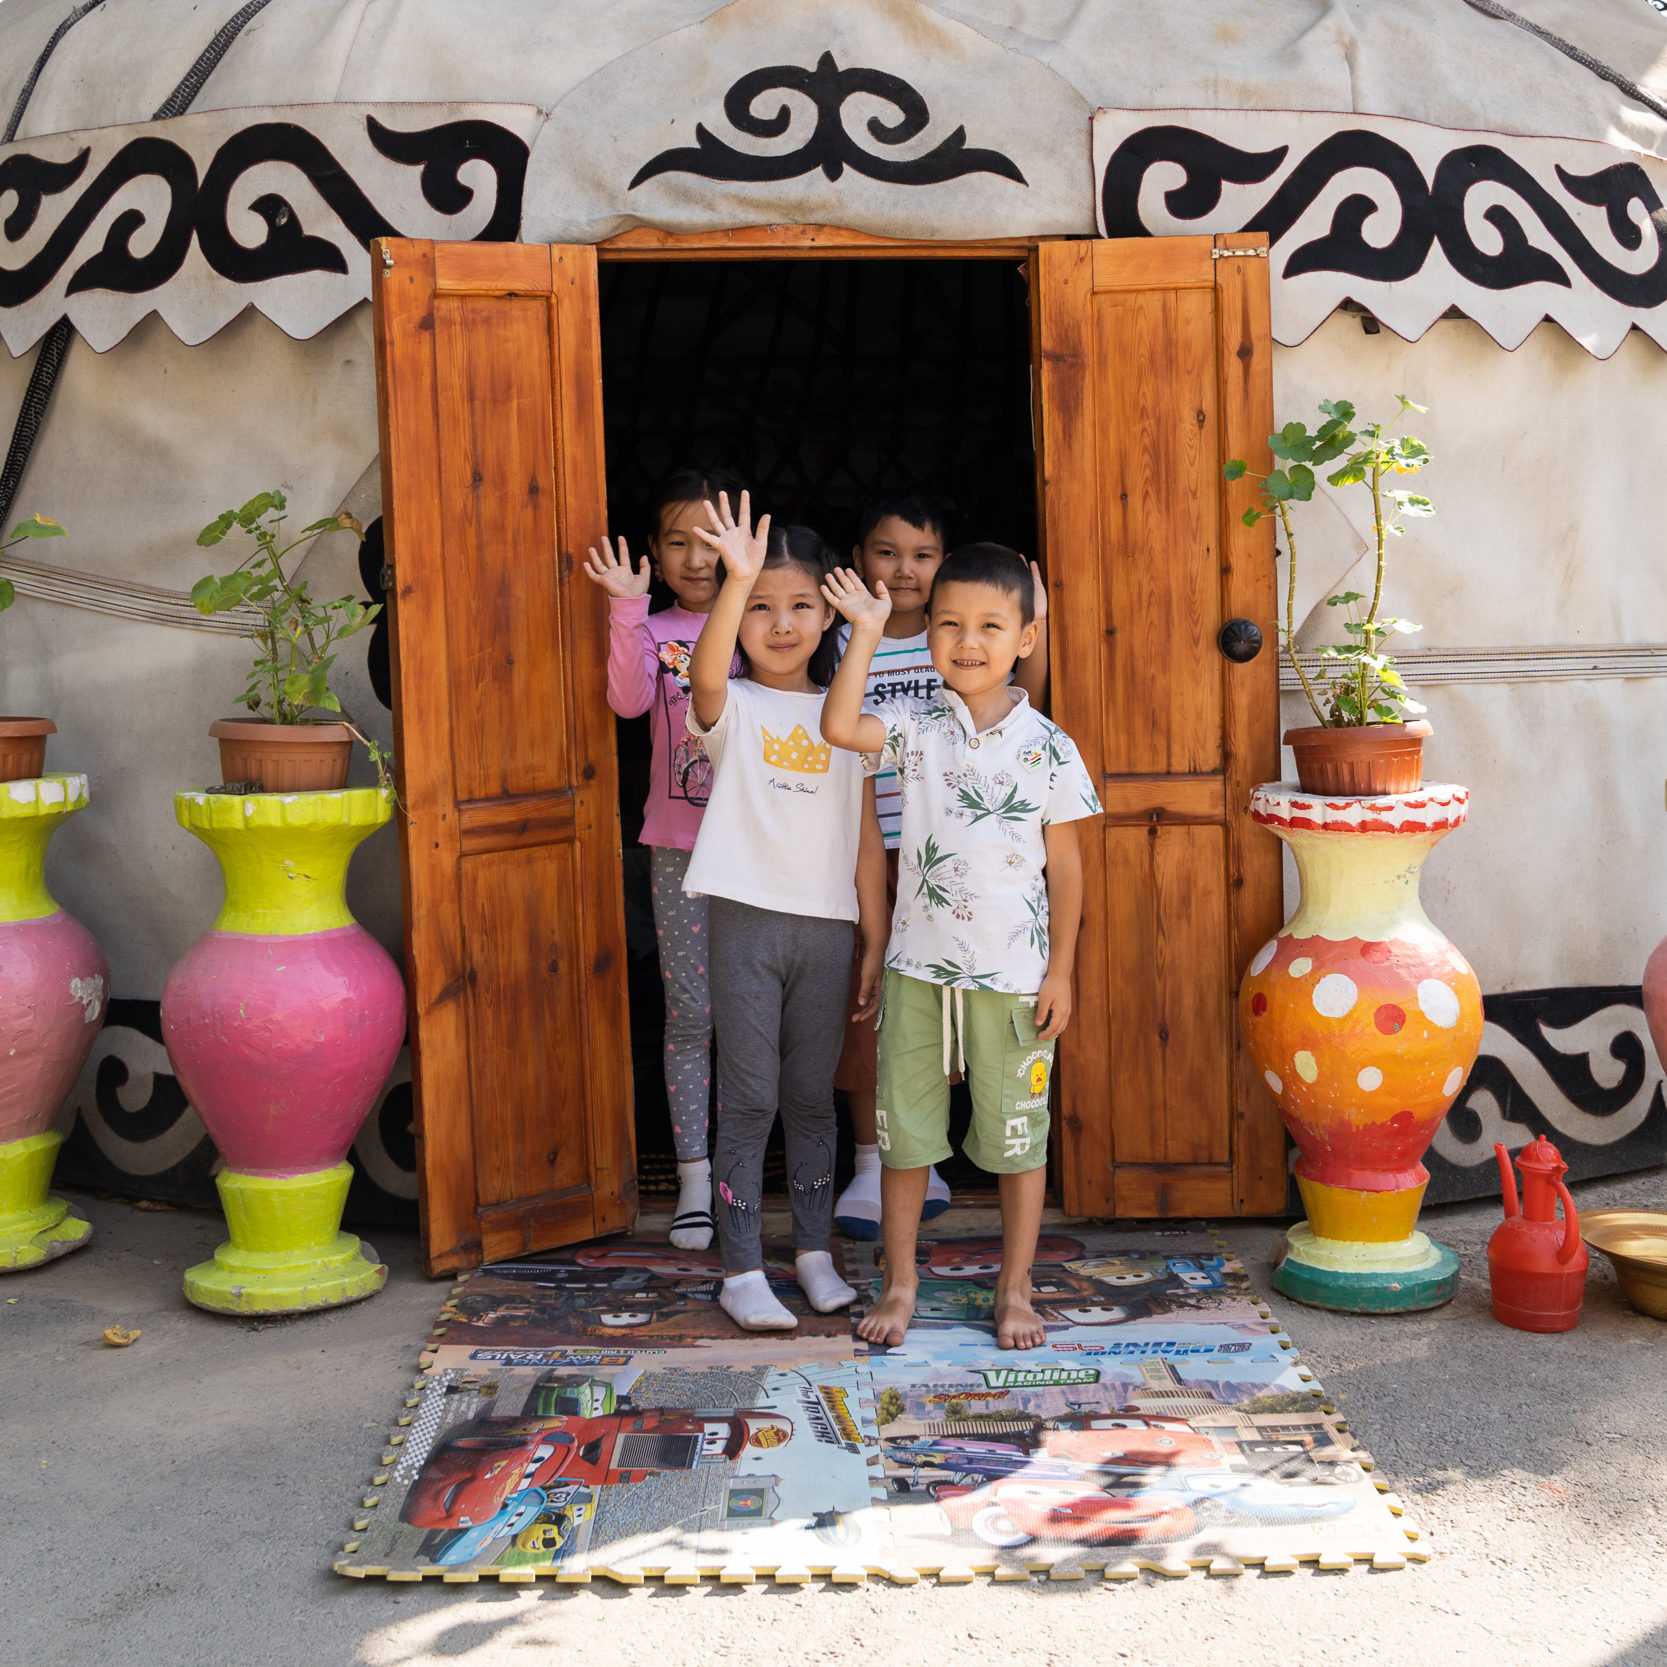 Children wave from the doorway of their traditional-style Kyrgyz classroom building.